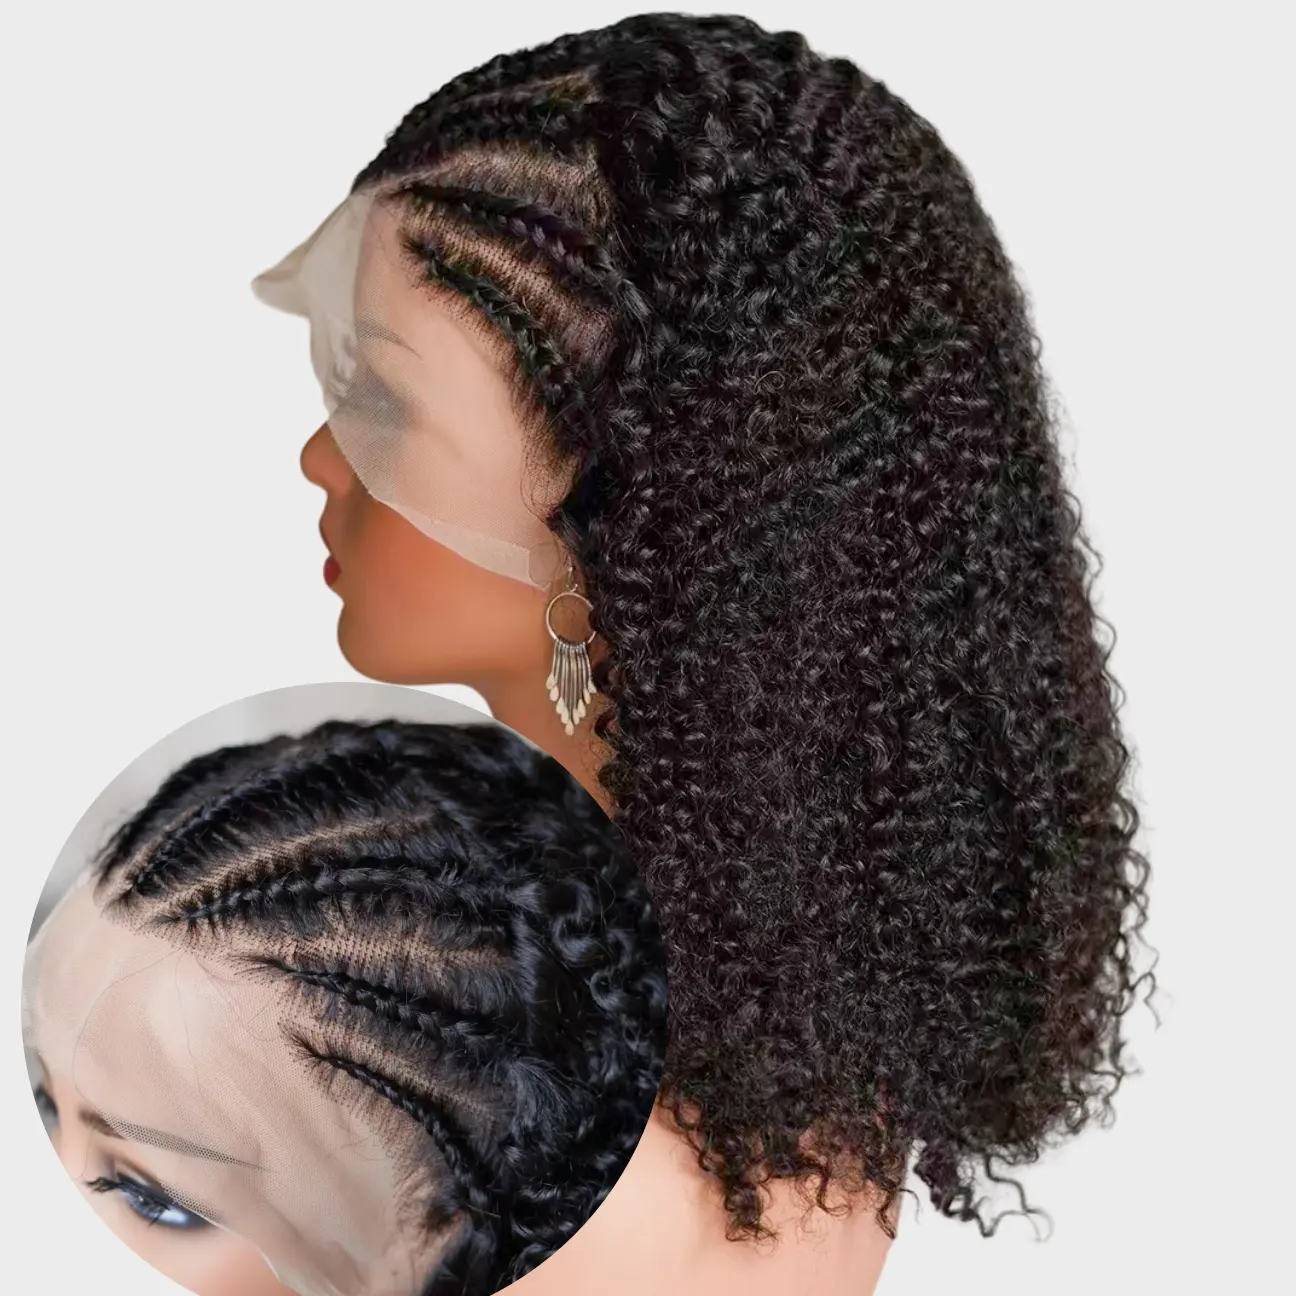 Wholesale Braided wigs human hair lace front wig for black women virgin Brazilian cuticle aligned wavy curly wigs human hair